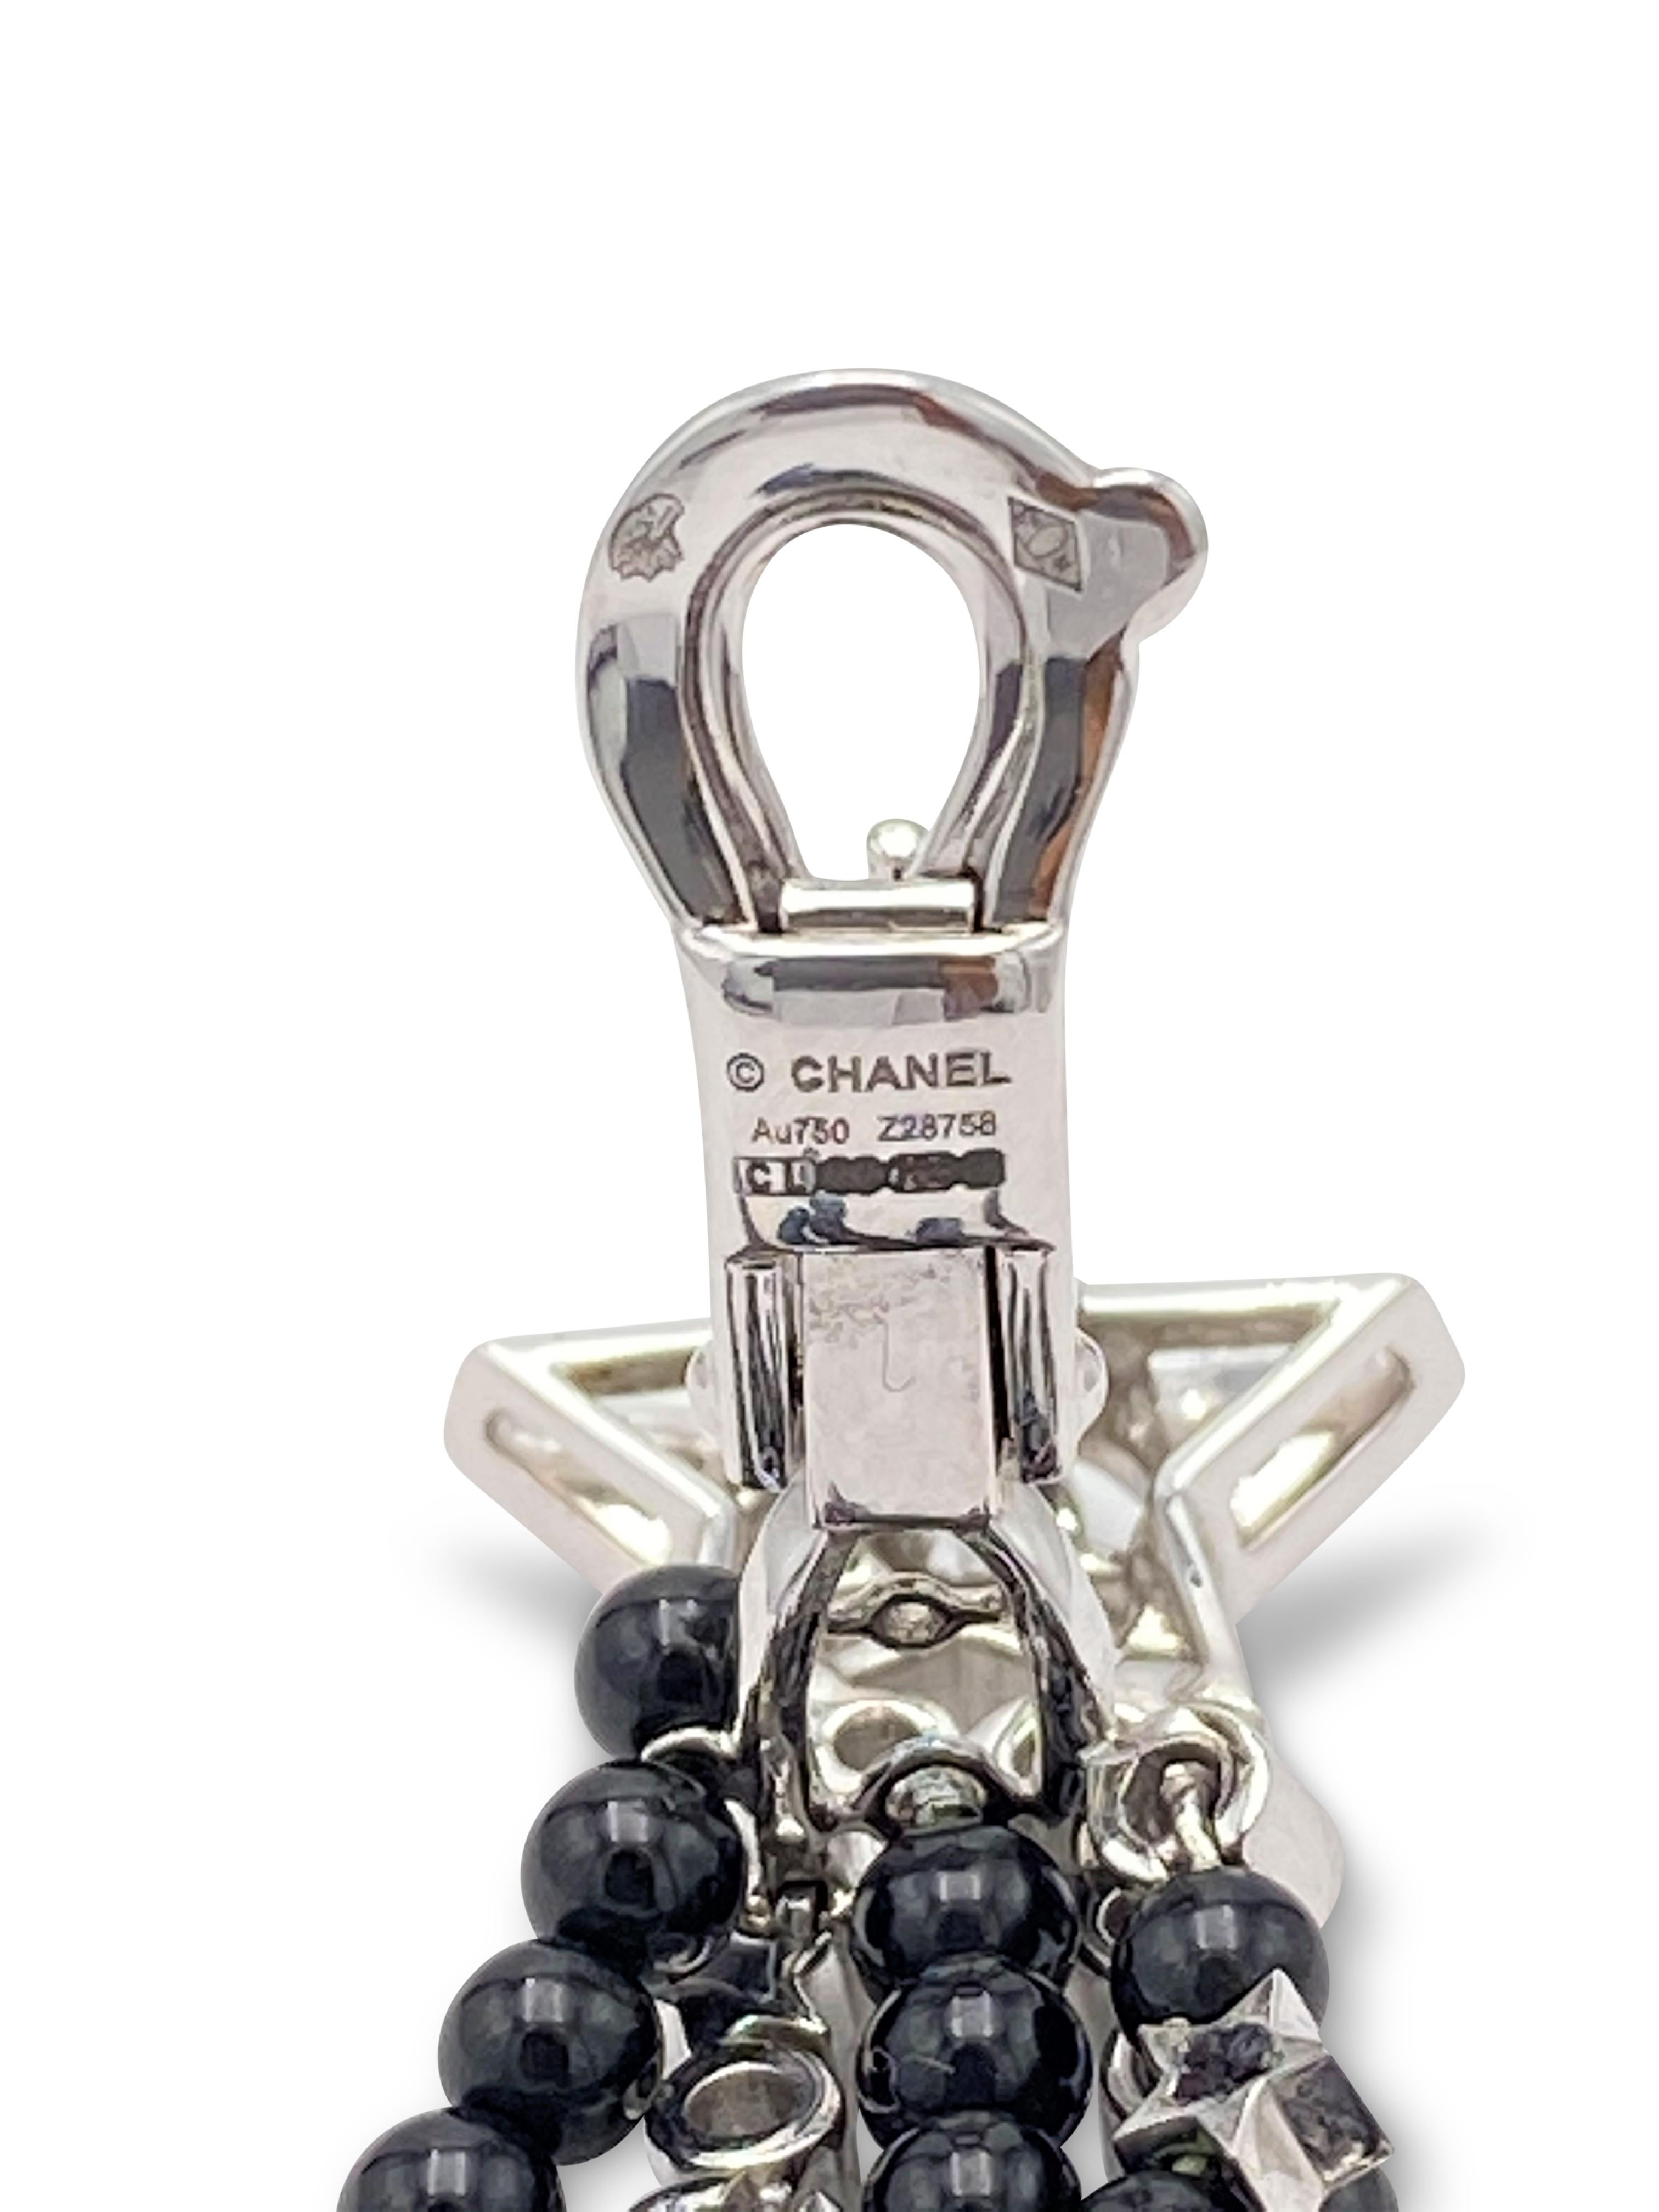 Round Cut Chanel Comète Diamond and Black Spinel Earrings